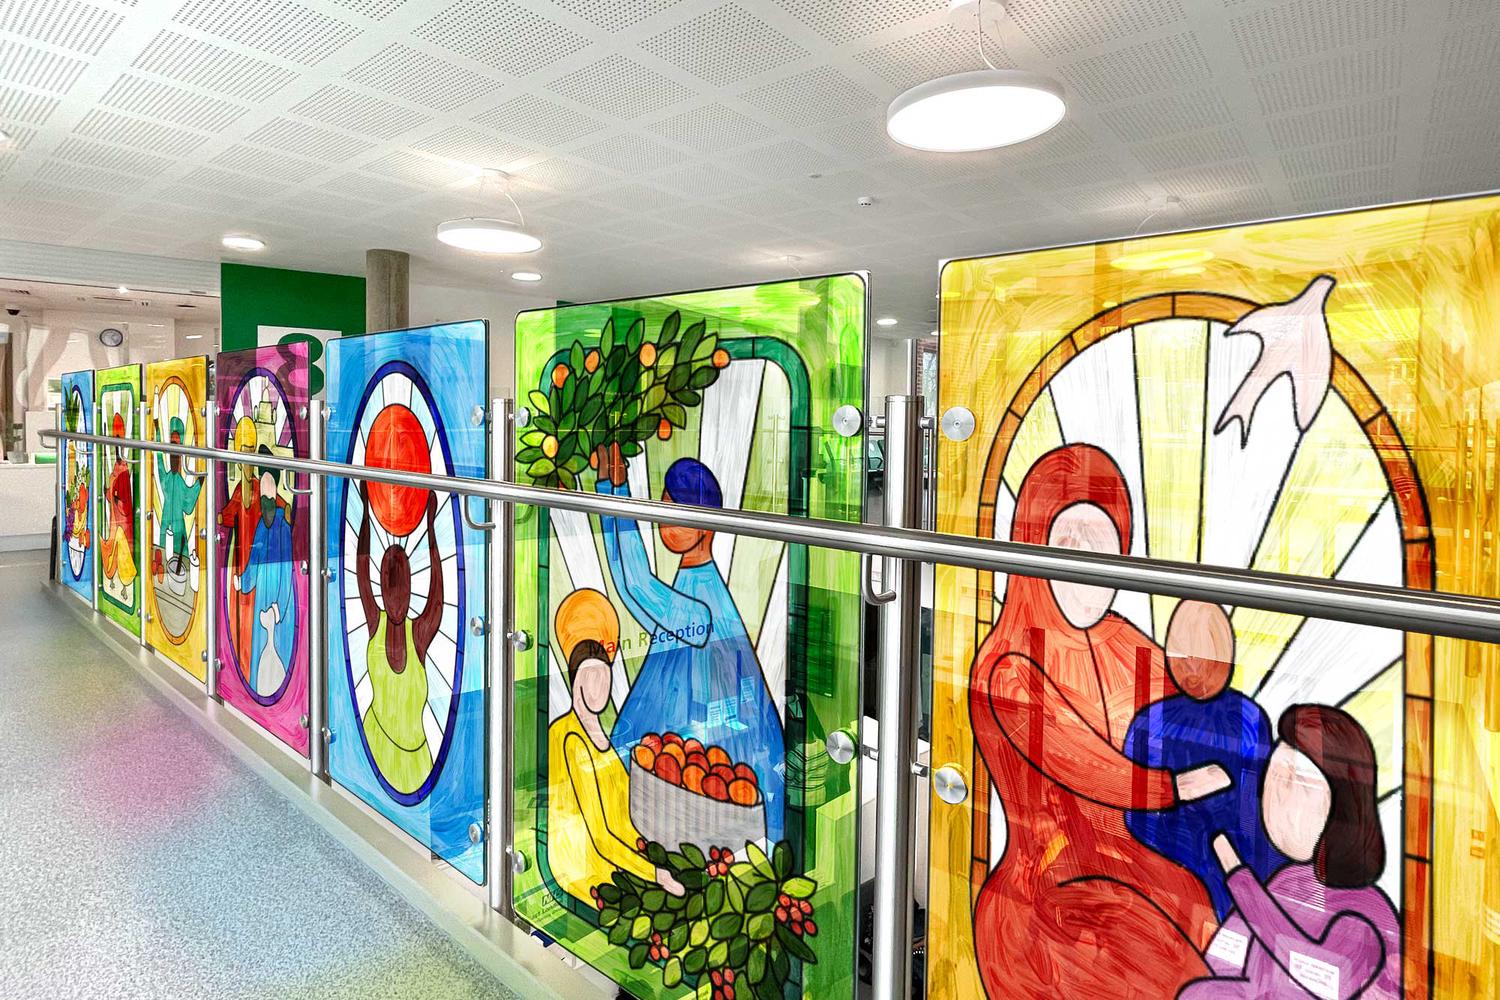 The World We Care colorful panels installed at Tessa Jowell Health Centre First Floor